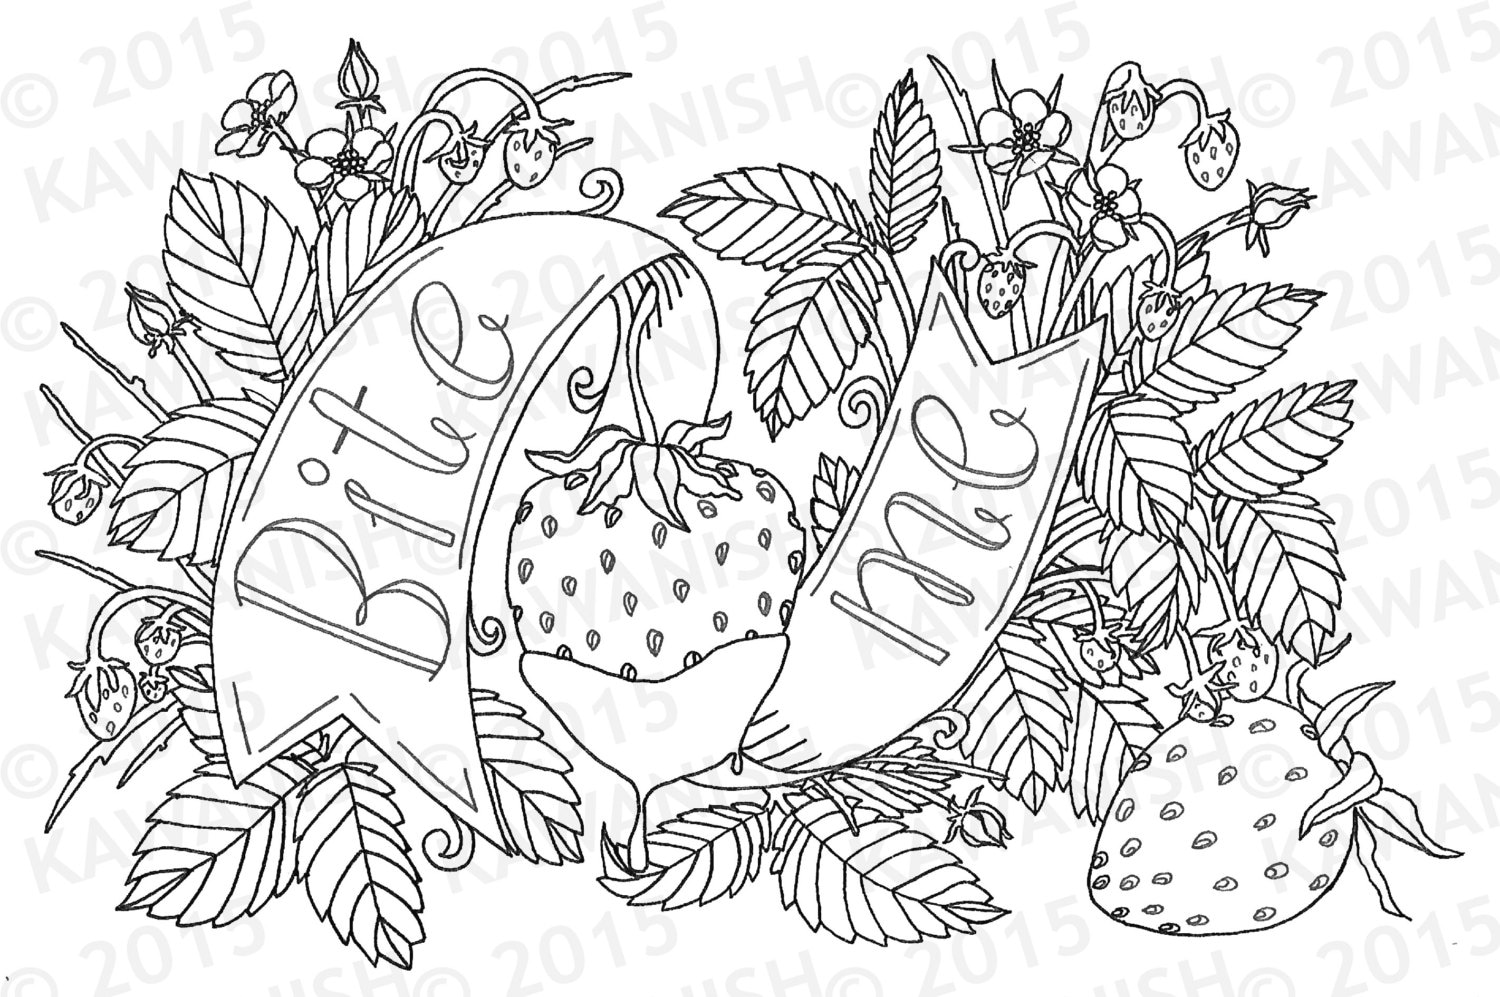 Bite Strawberry Adult Coloring Page Wall Art Gift Funny Humor